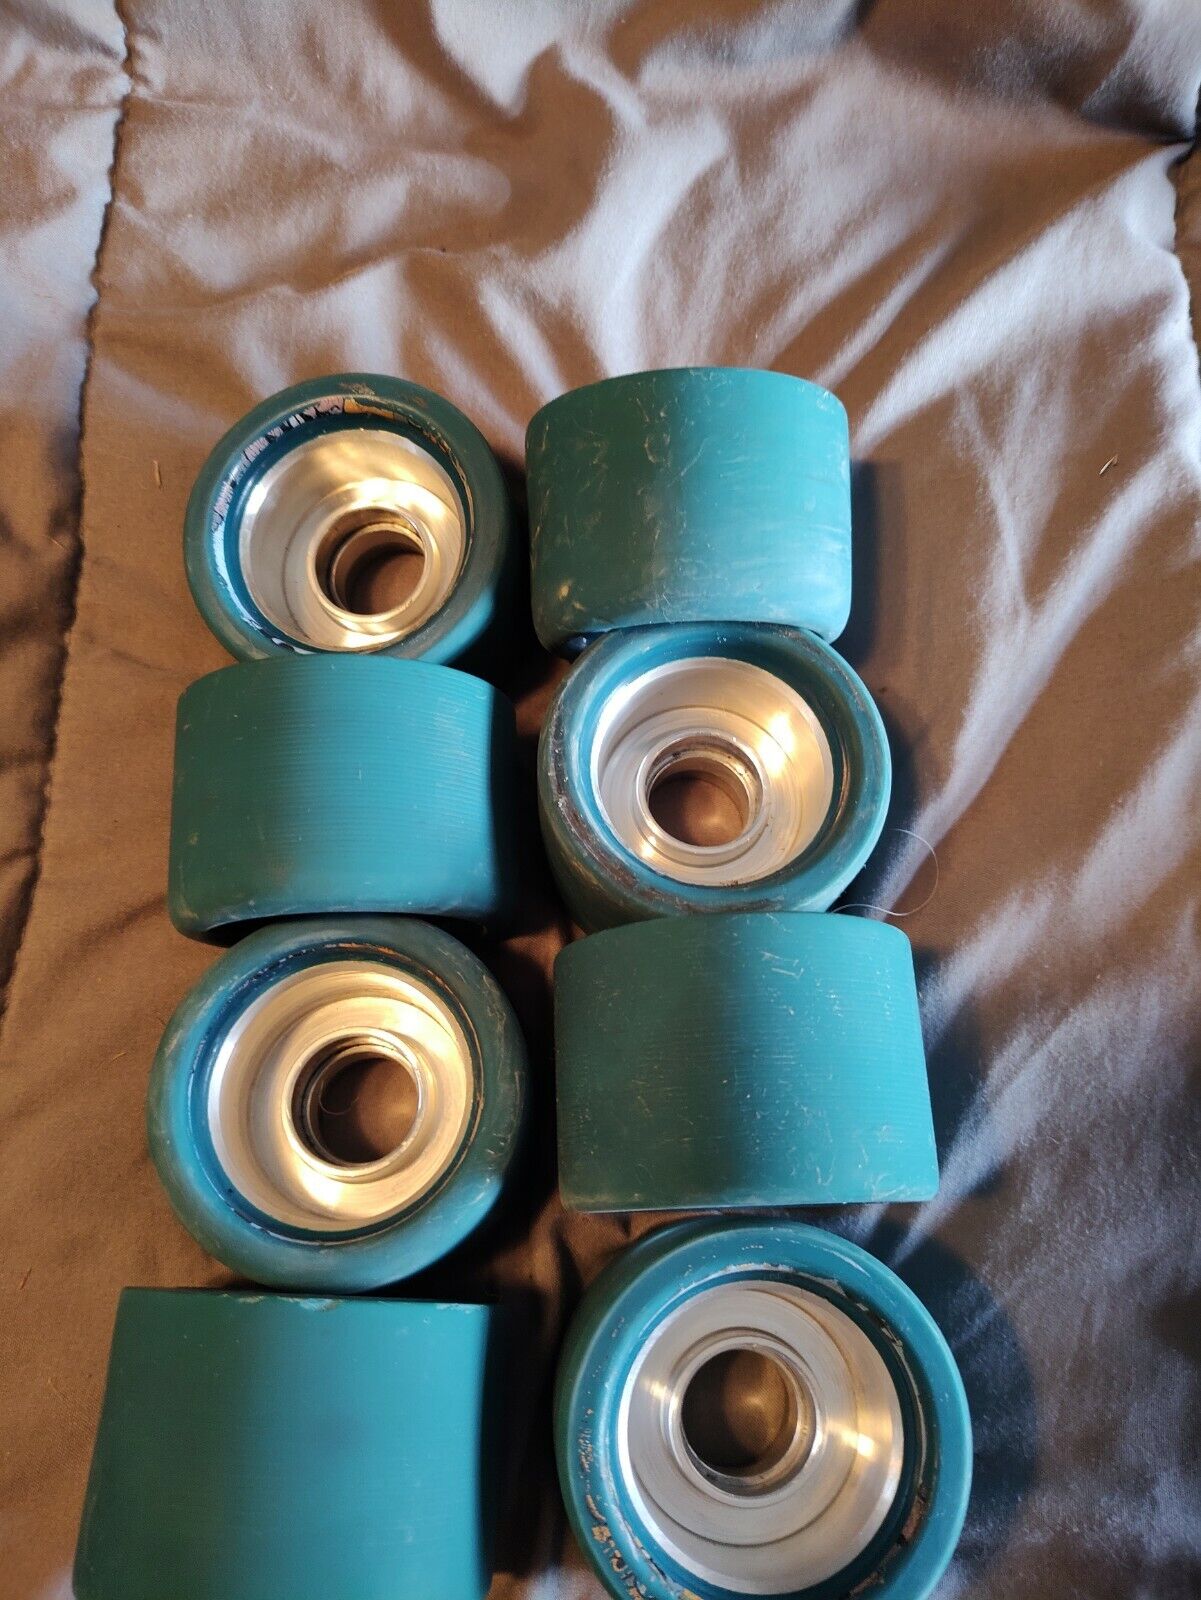 Sure Grip MONZA Direct stock Sale discount Speed Roller Skate Teal 98a Wheels 62x42mm Alumi